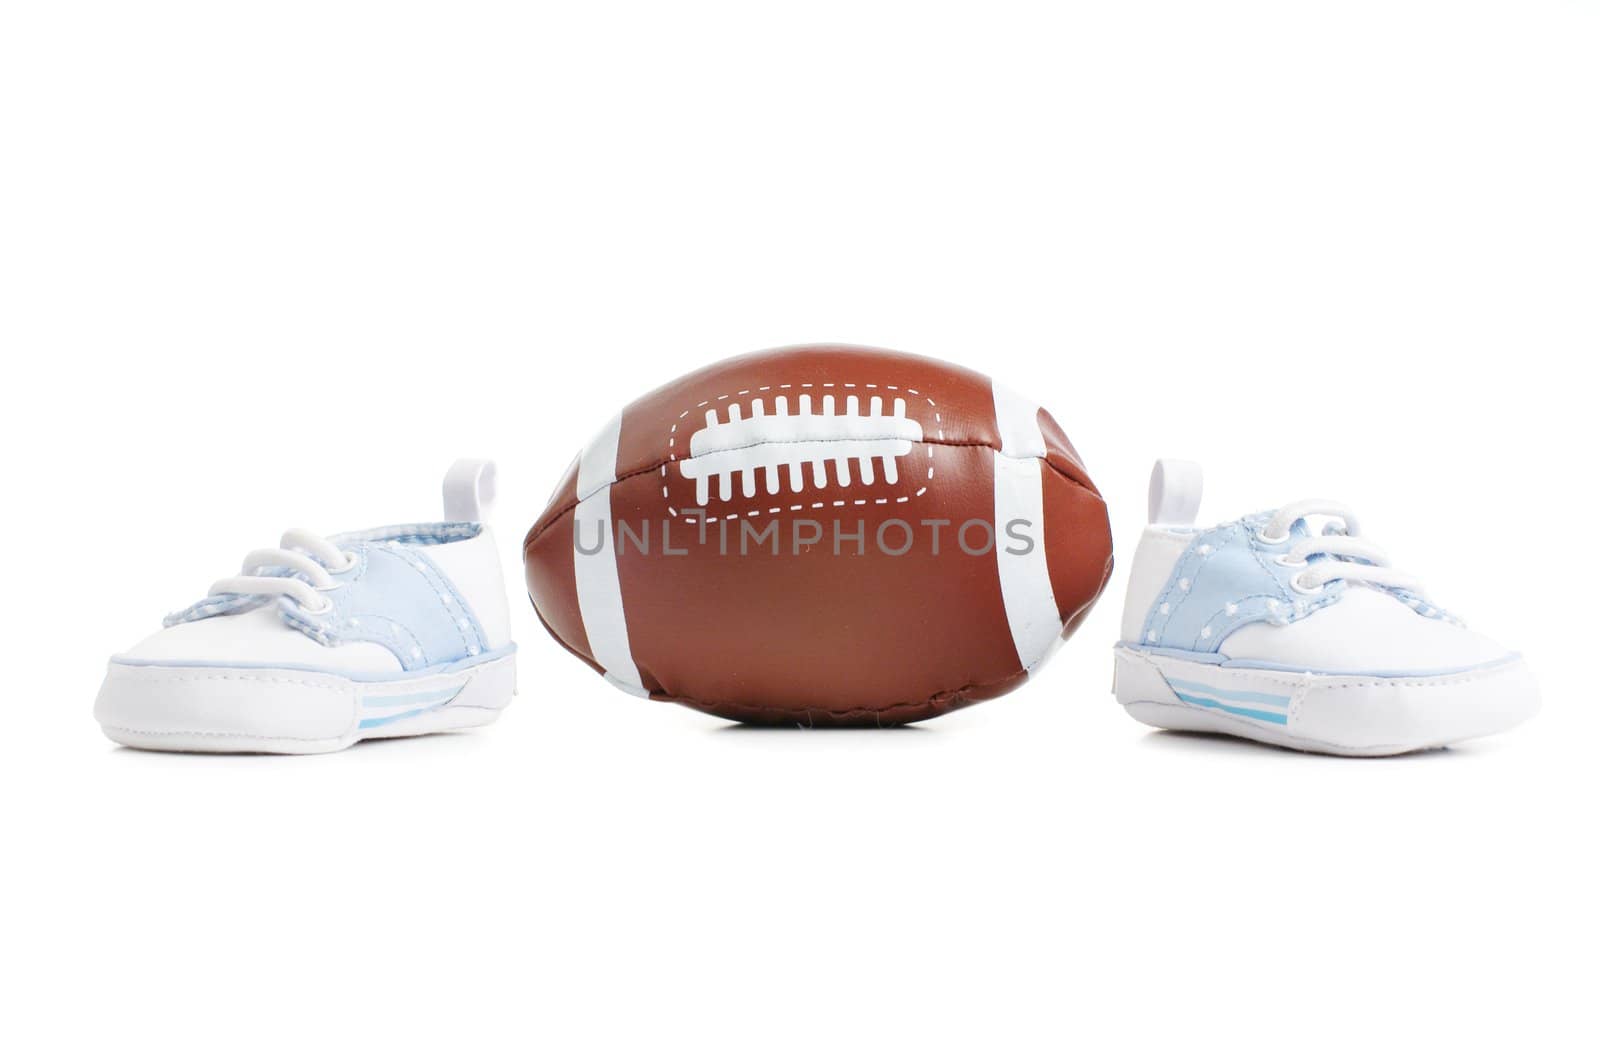 Football with baby shoes against a white background.